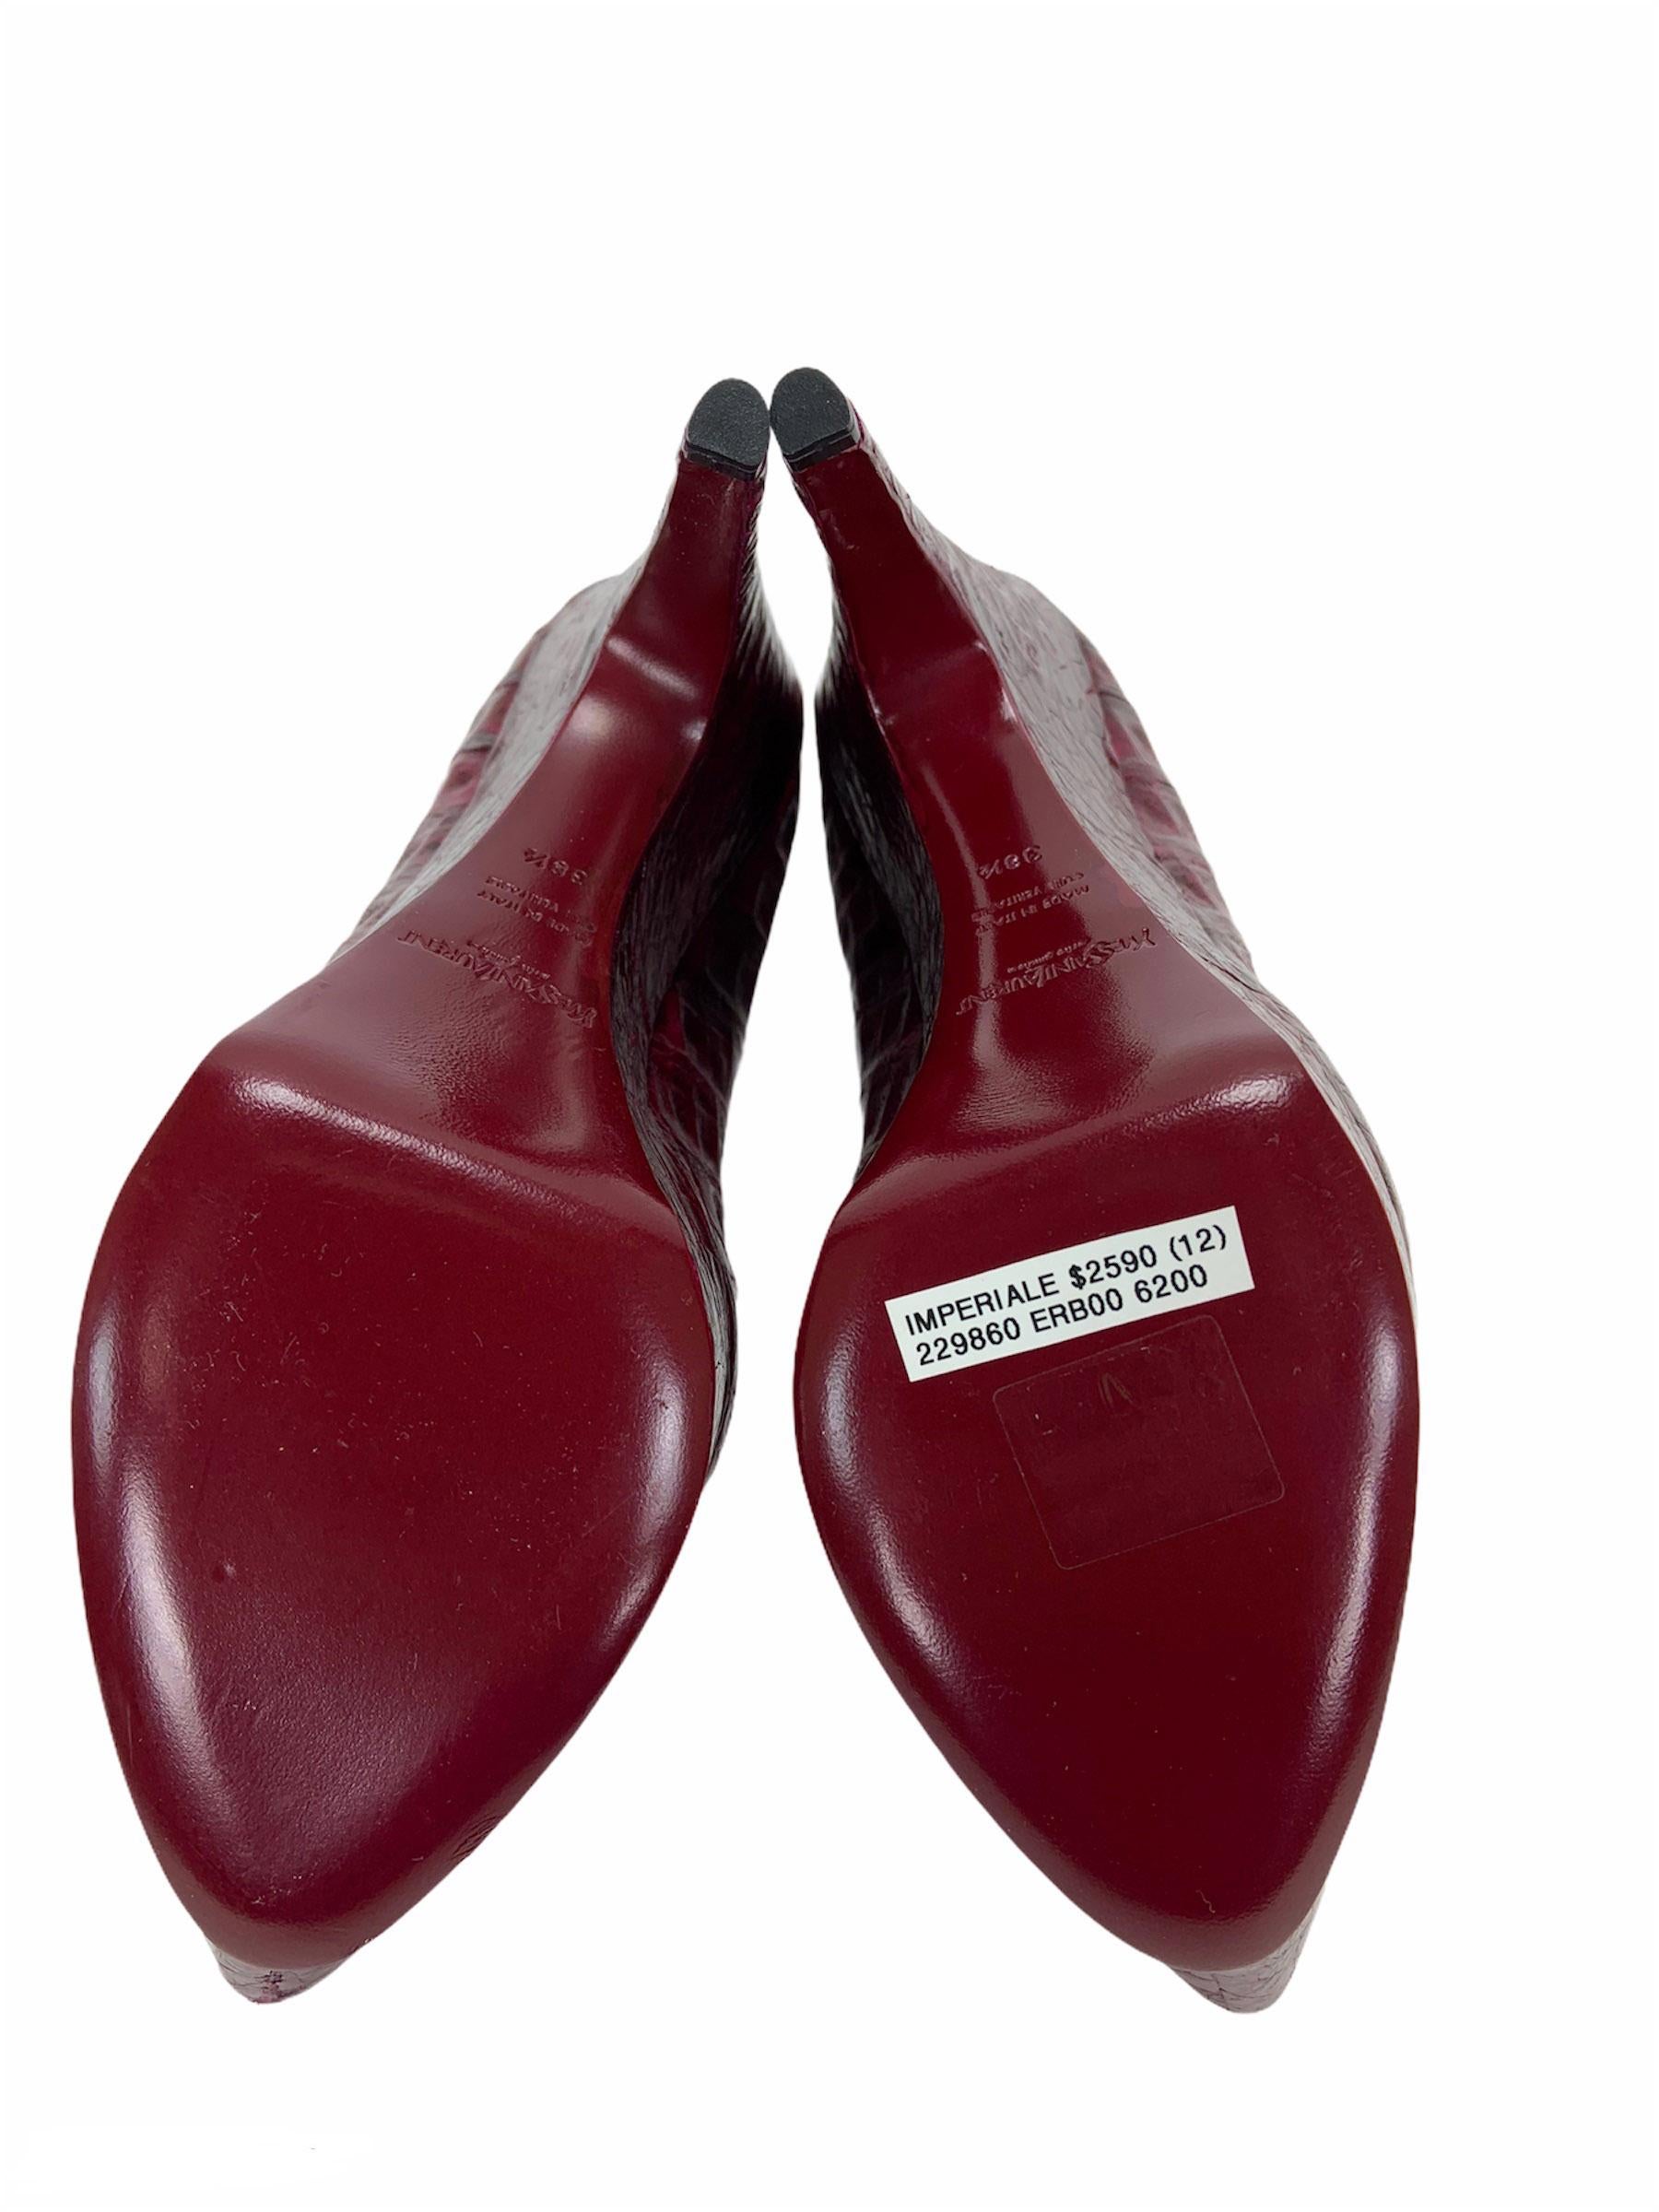 New $2590 Yves Saint Laurent Raspberry Alligator Platform Shoes Pumps 38.5 - 8.5 In New Condition For Sale In Montgomery, TX